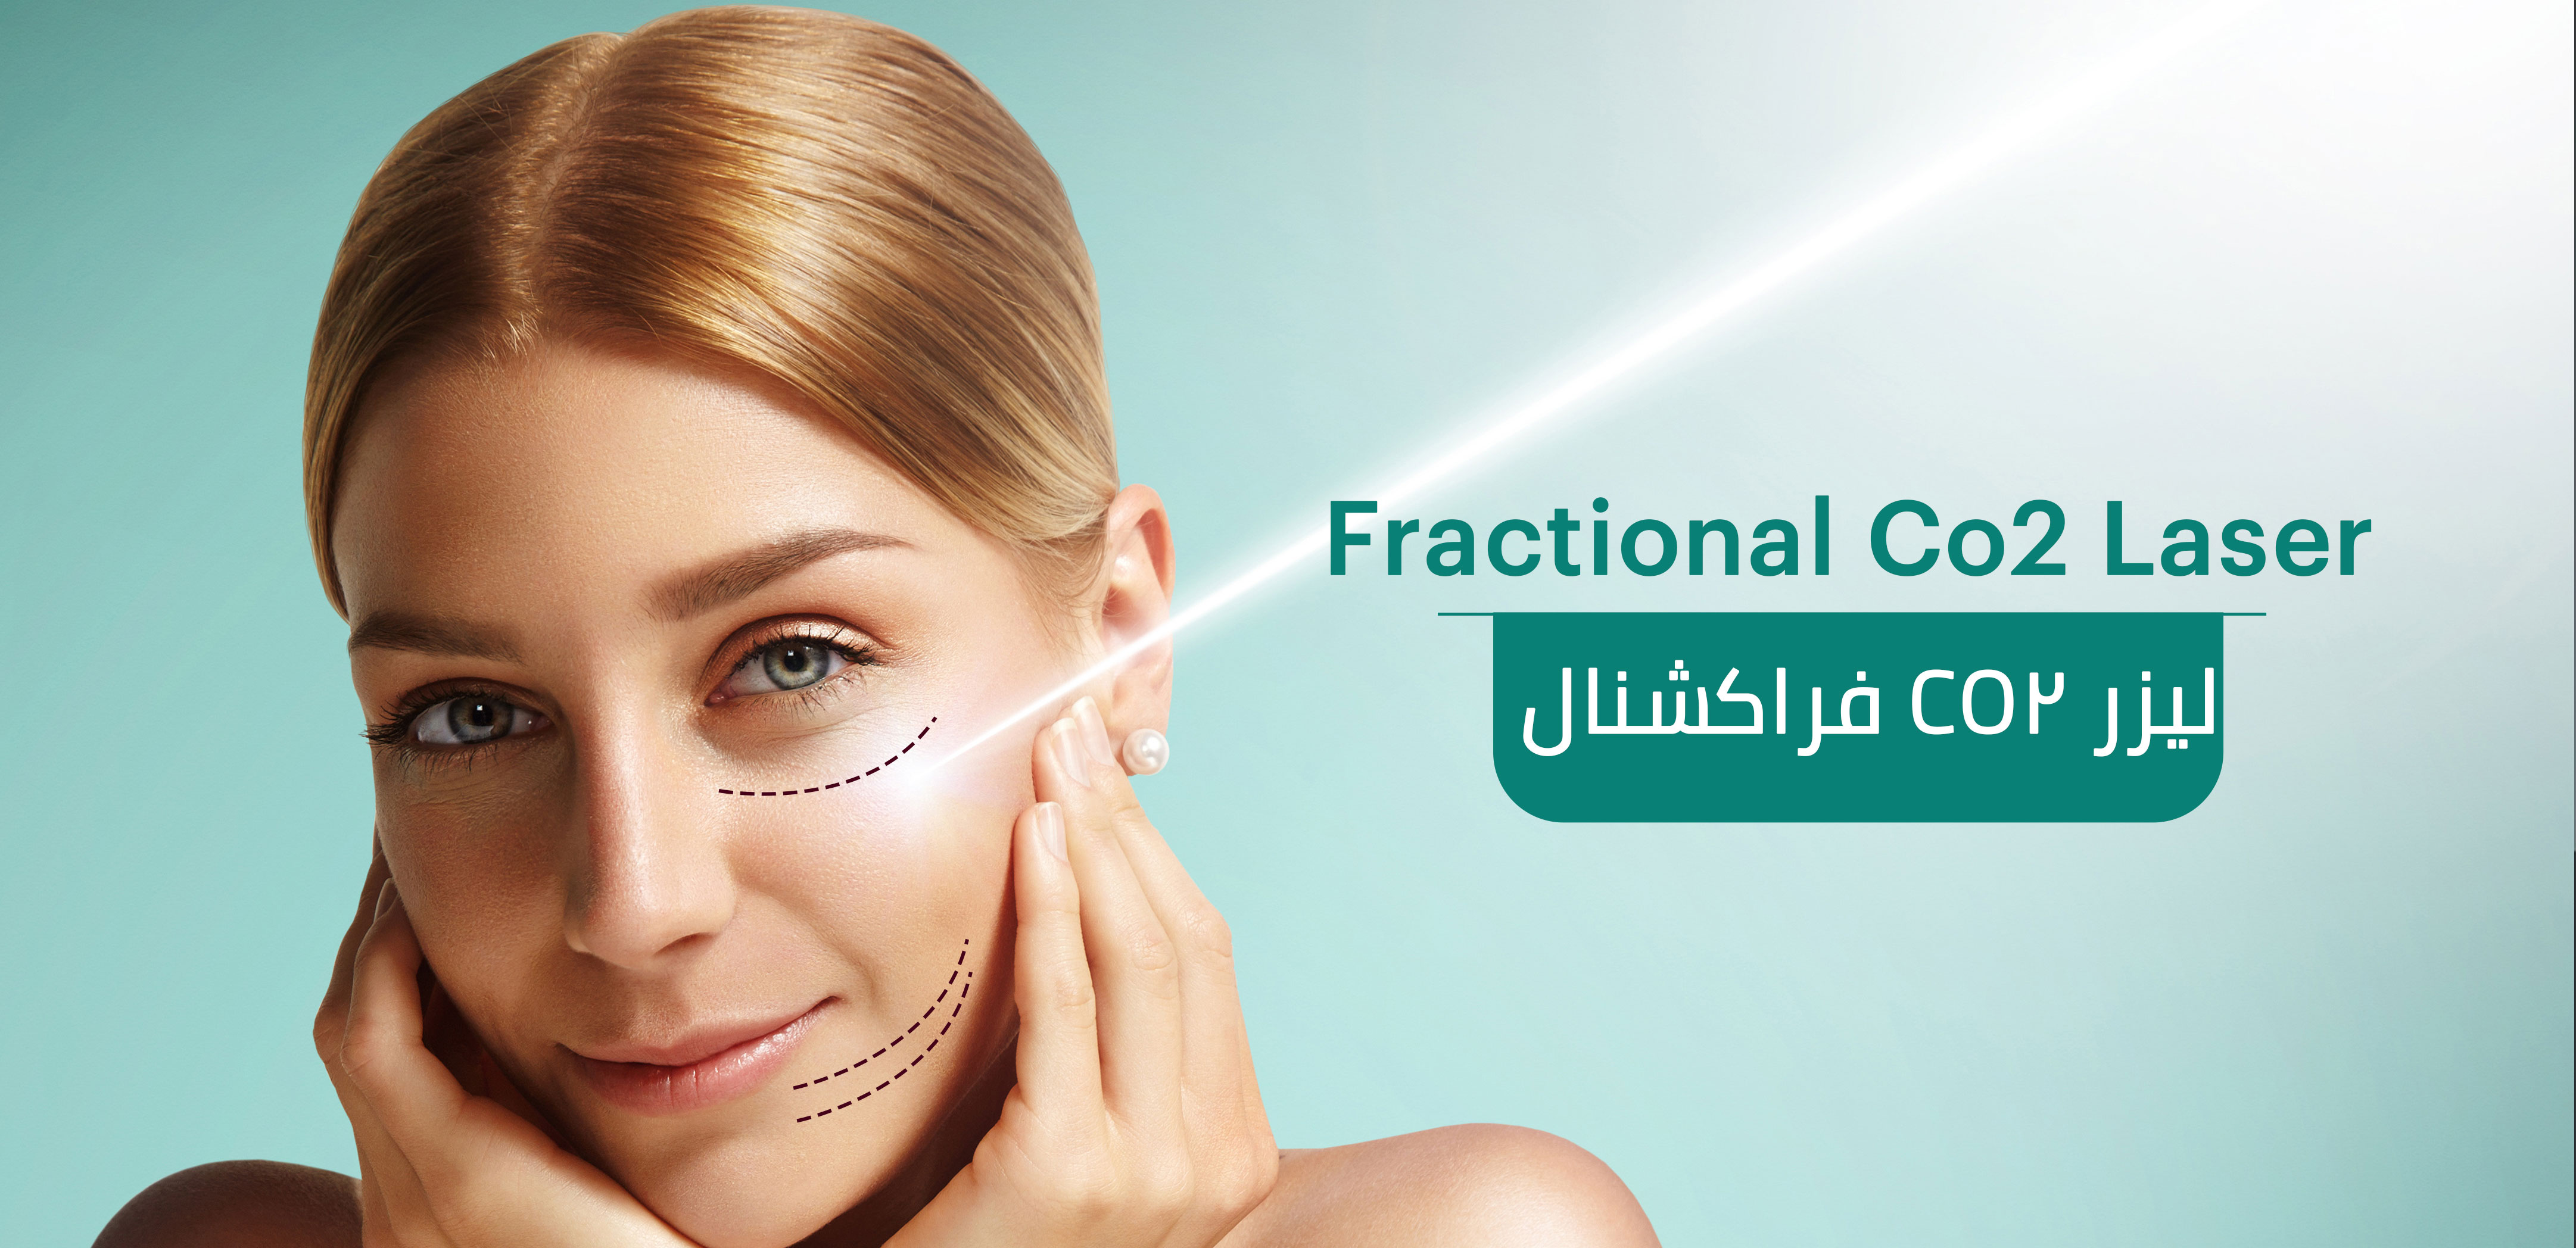 WHAT IS FRACTIONAL CO2 LASER?